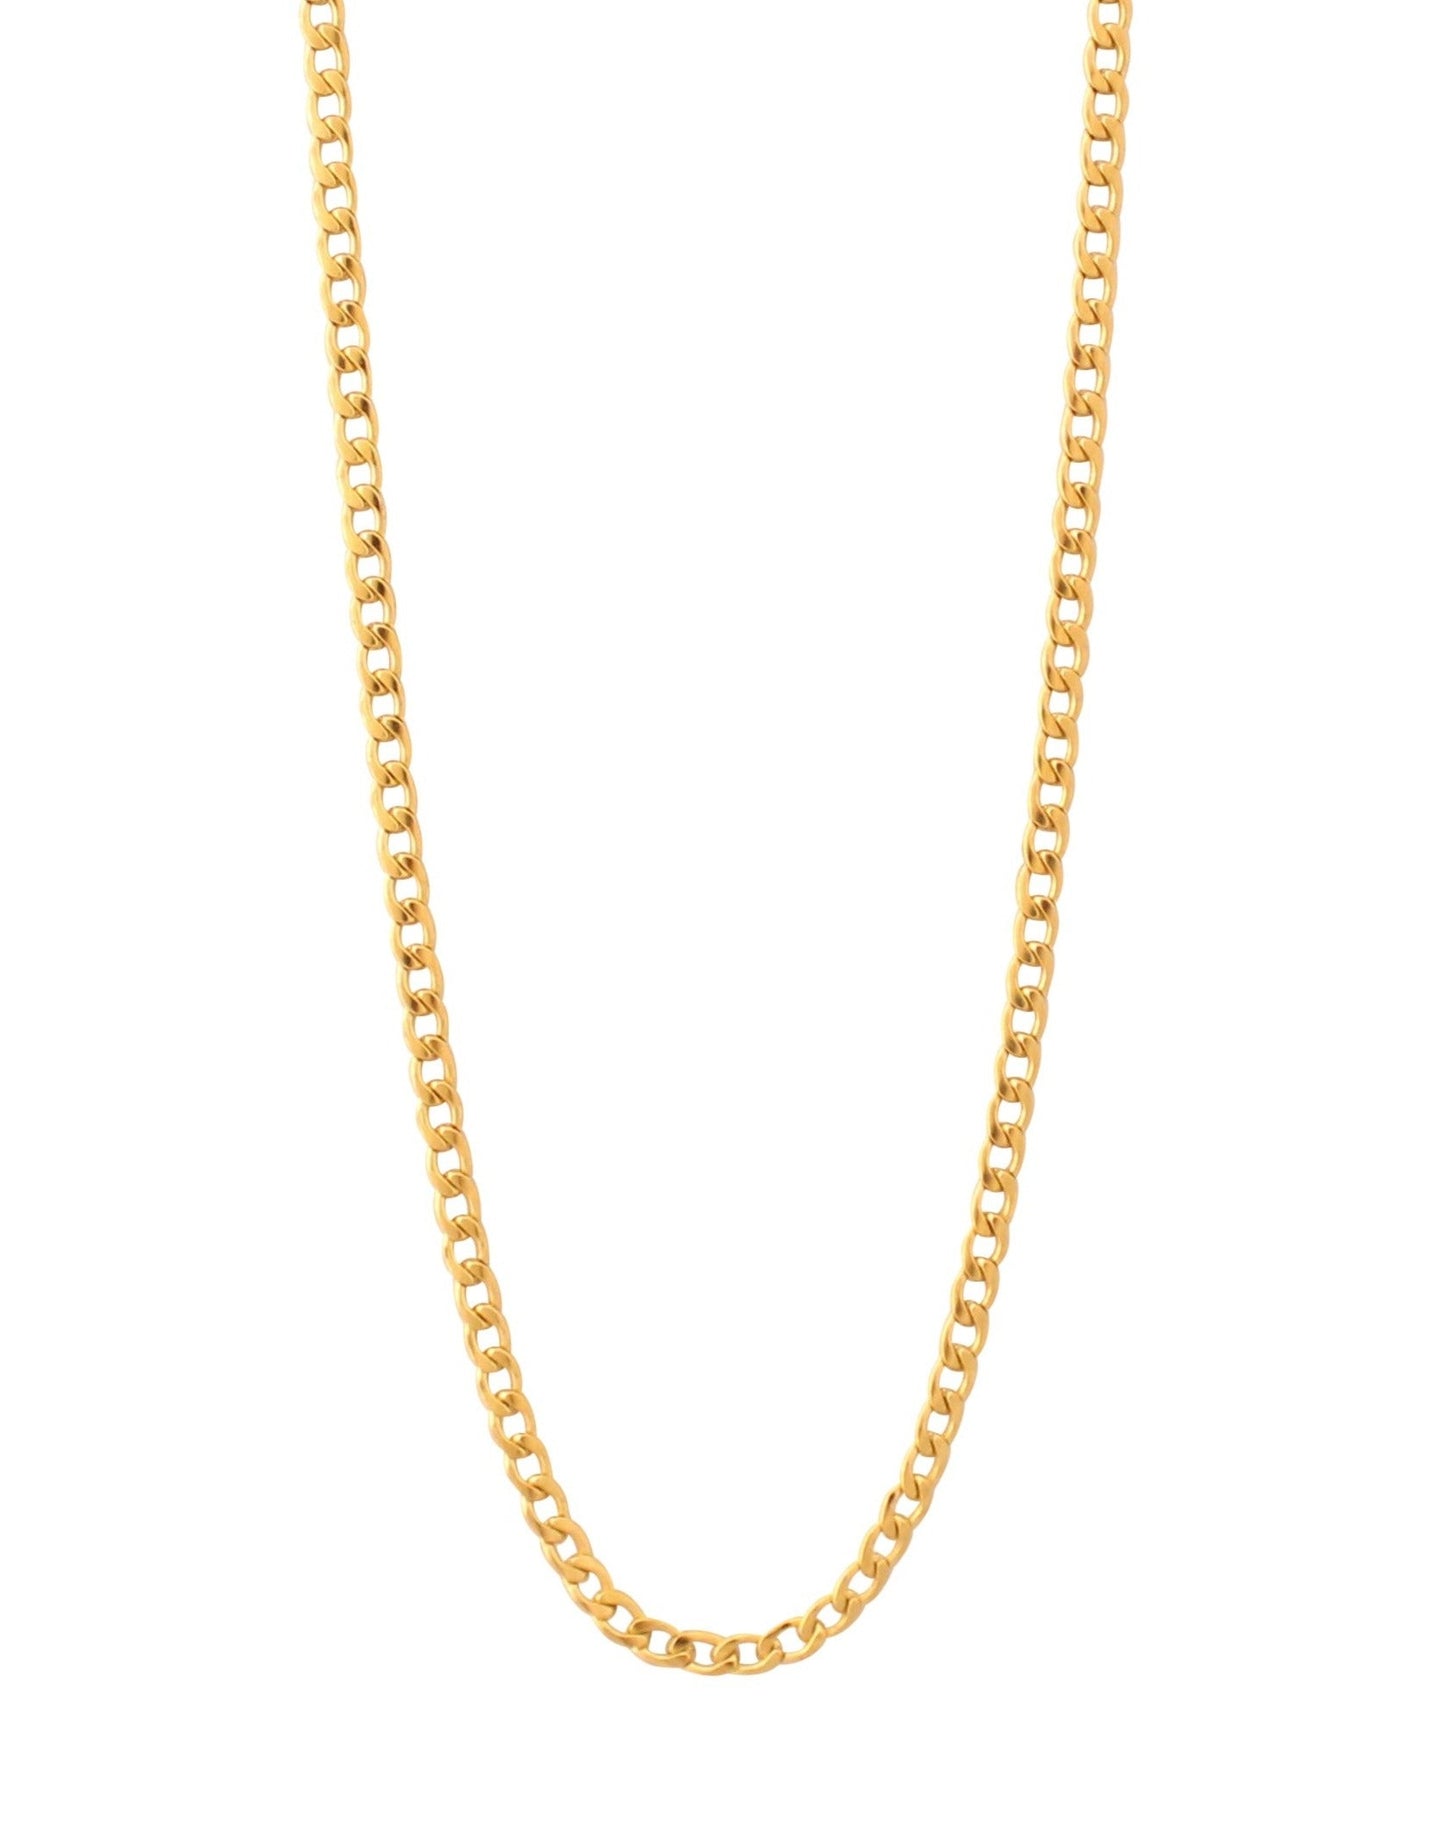 Lush Chain Necklace in Gold